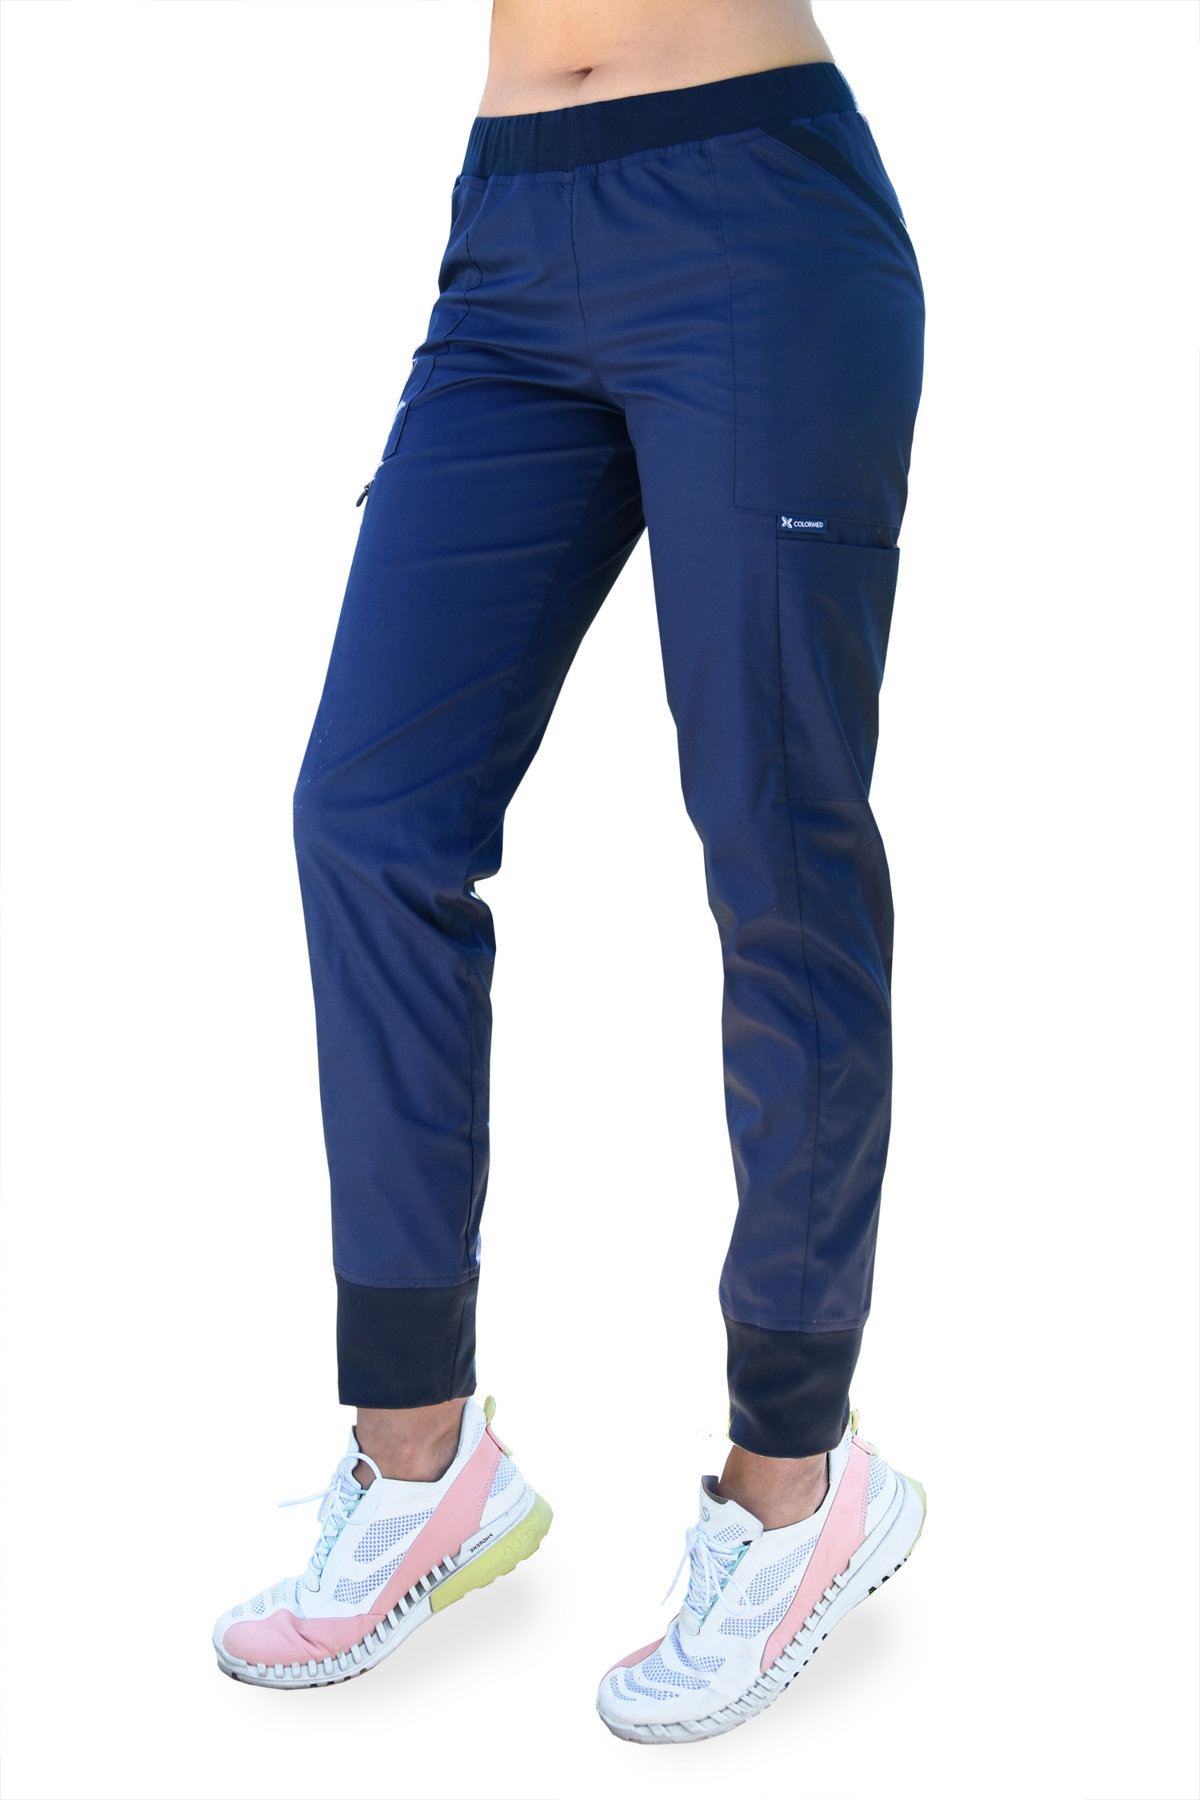 Scrubs pants SOFT a STRETCH, navy + Medical blue COLORMED | with stripe, lime, SE4-G2 clothes